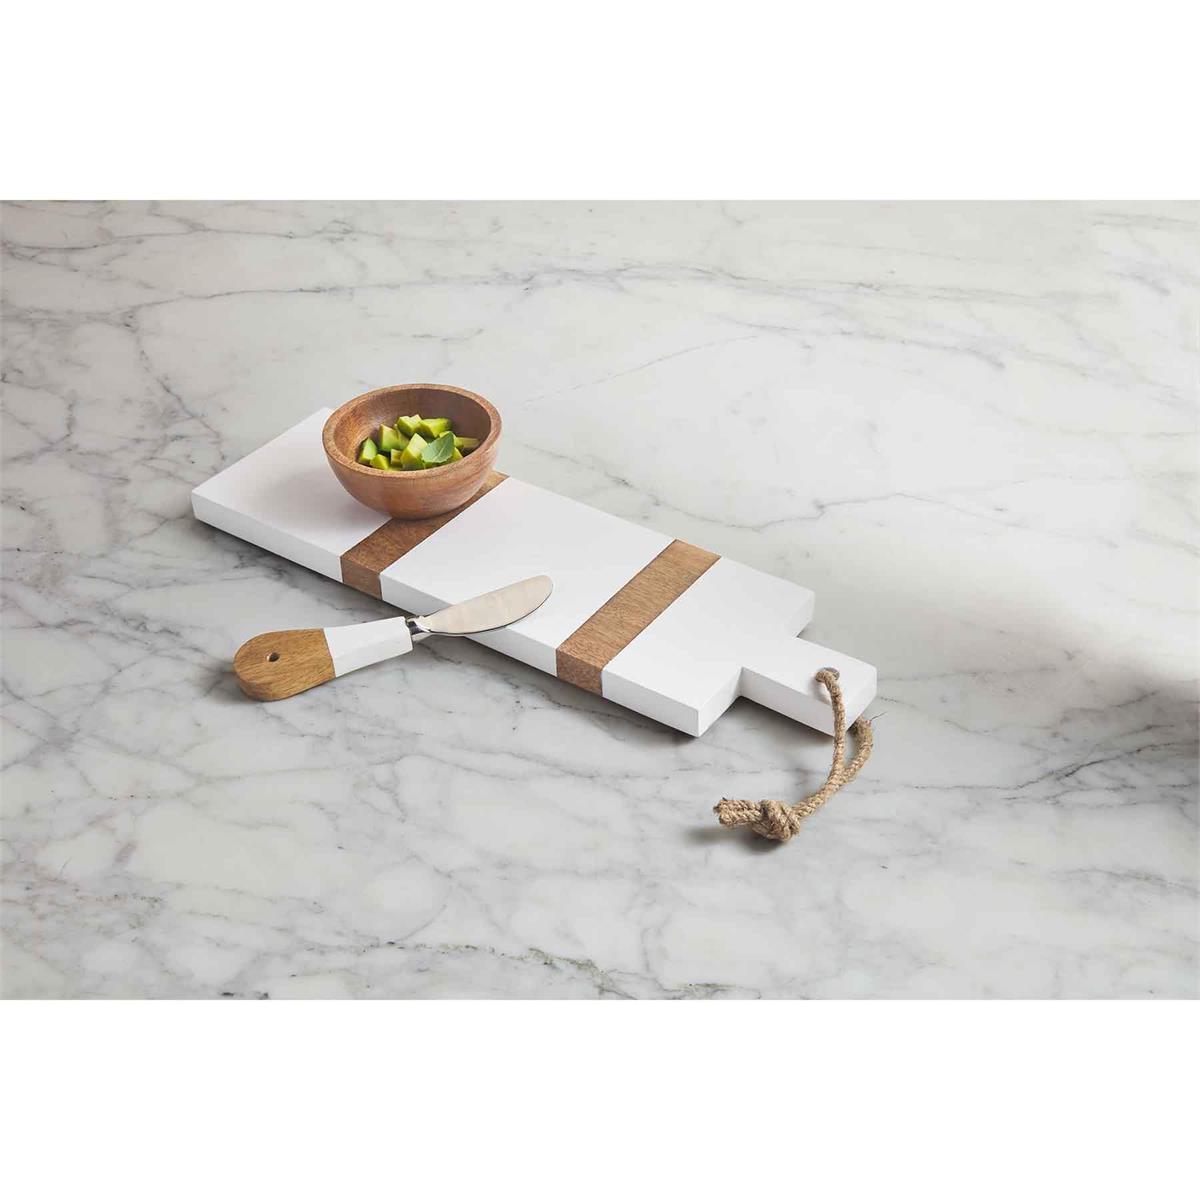 wood strap tray and dip set displayed on a white marble surface